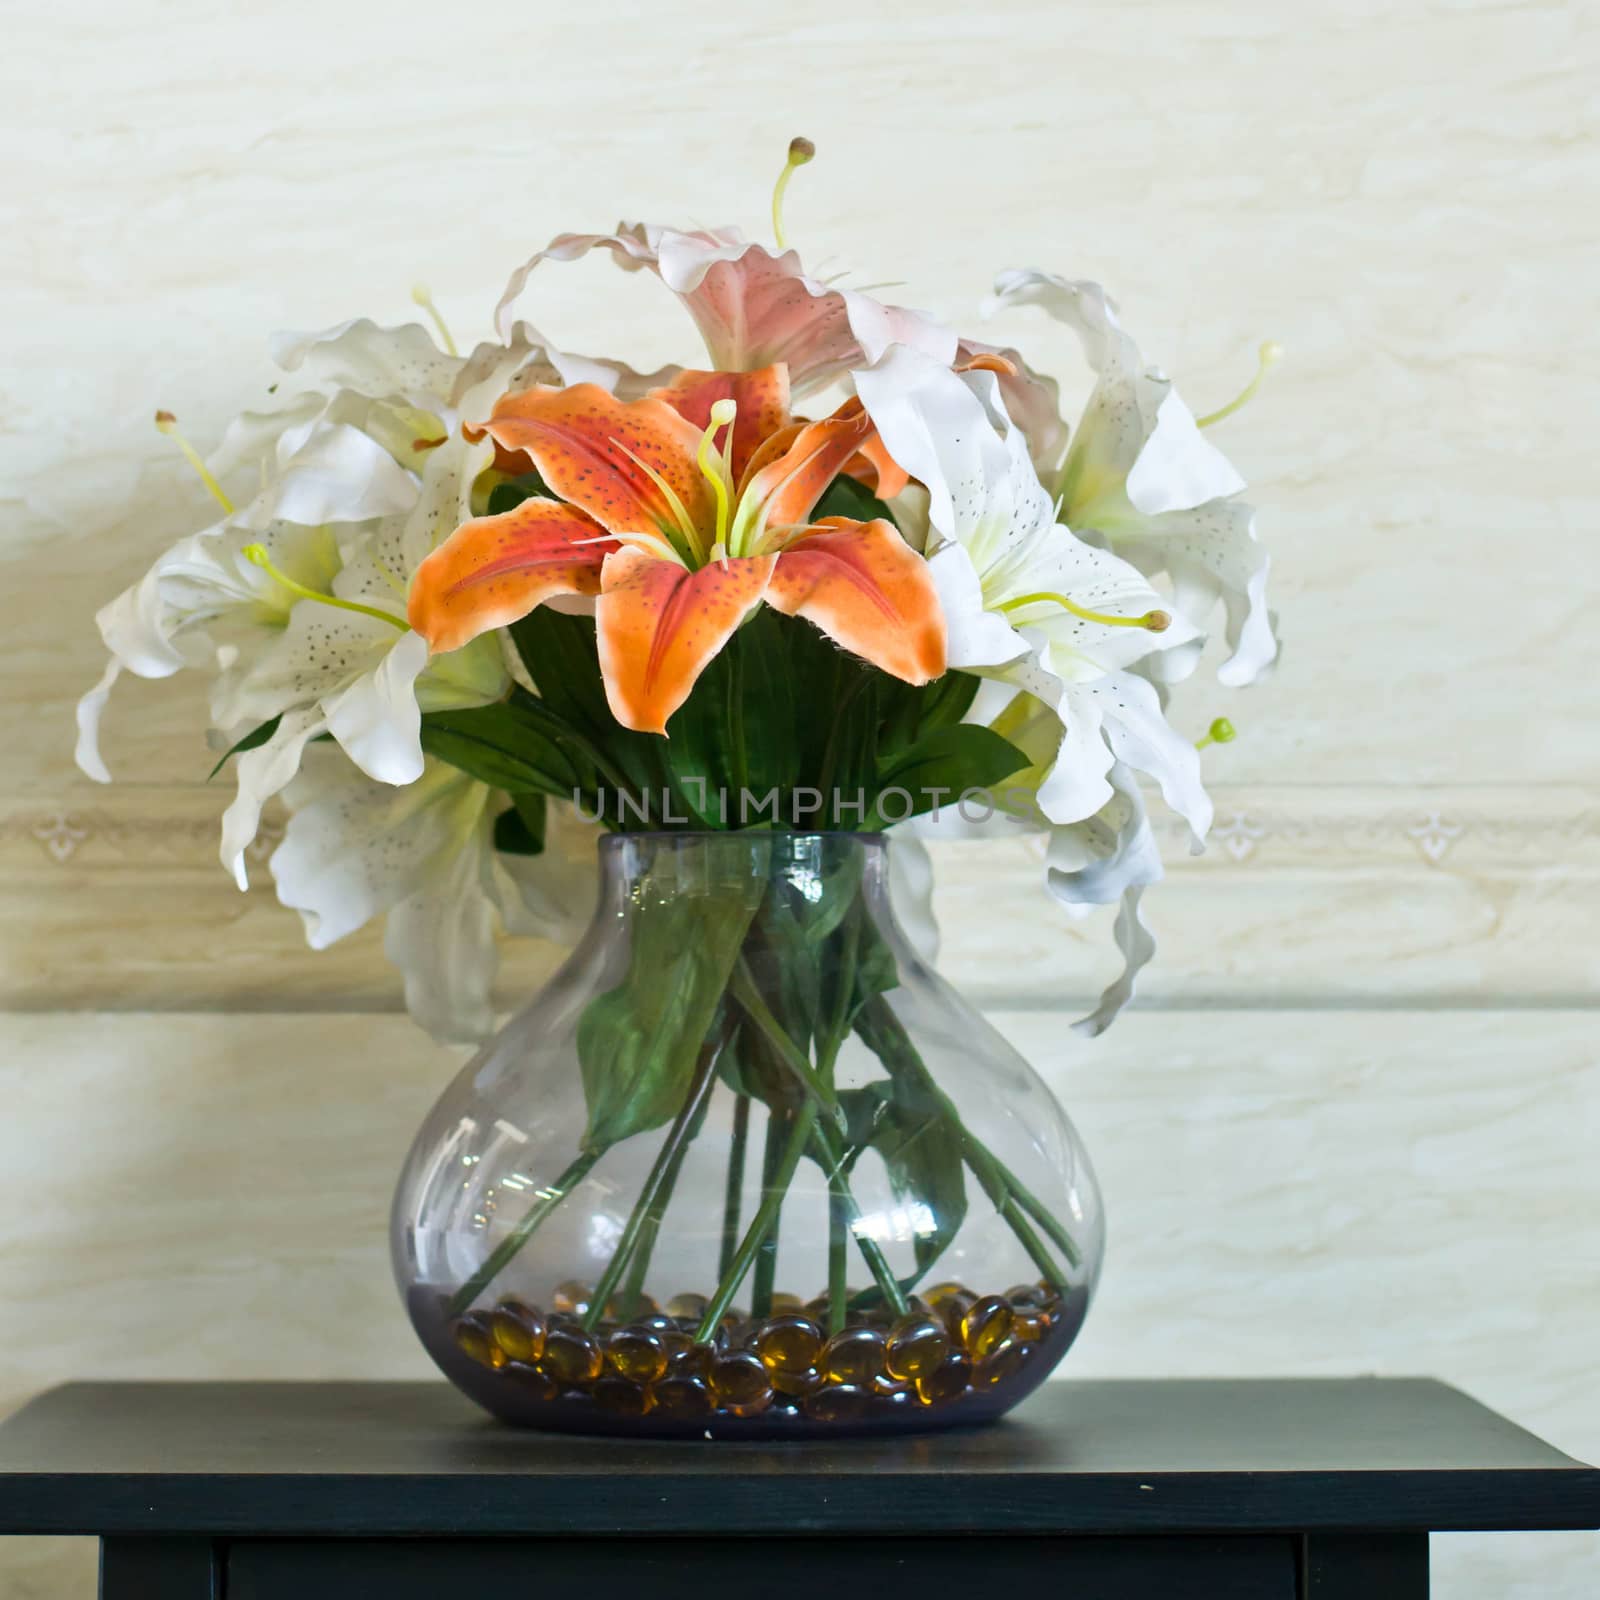 Flowers in a vase on the table